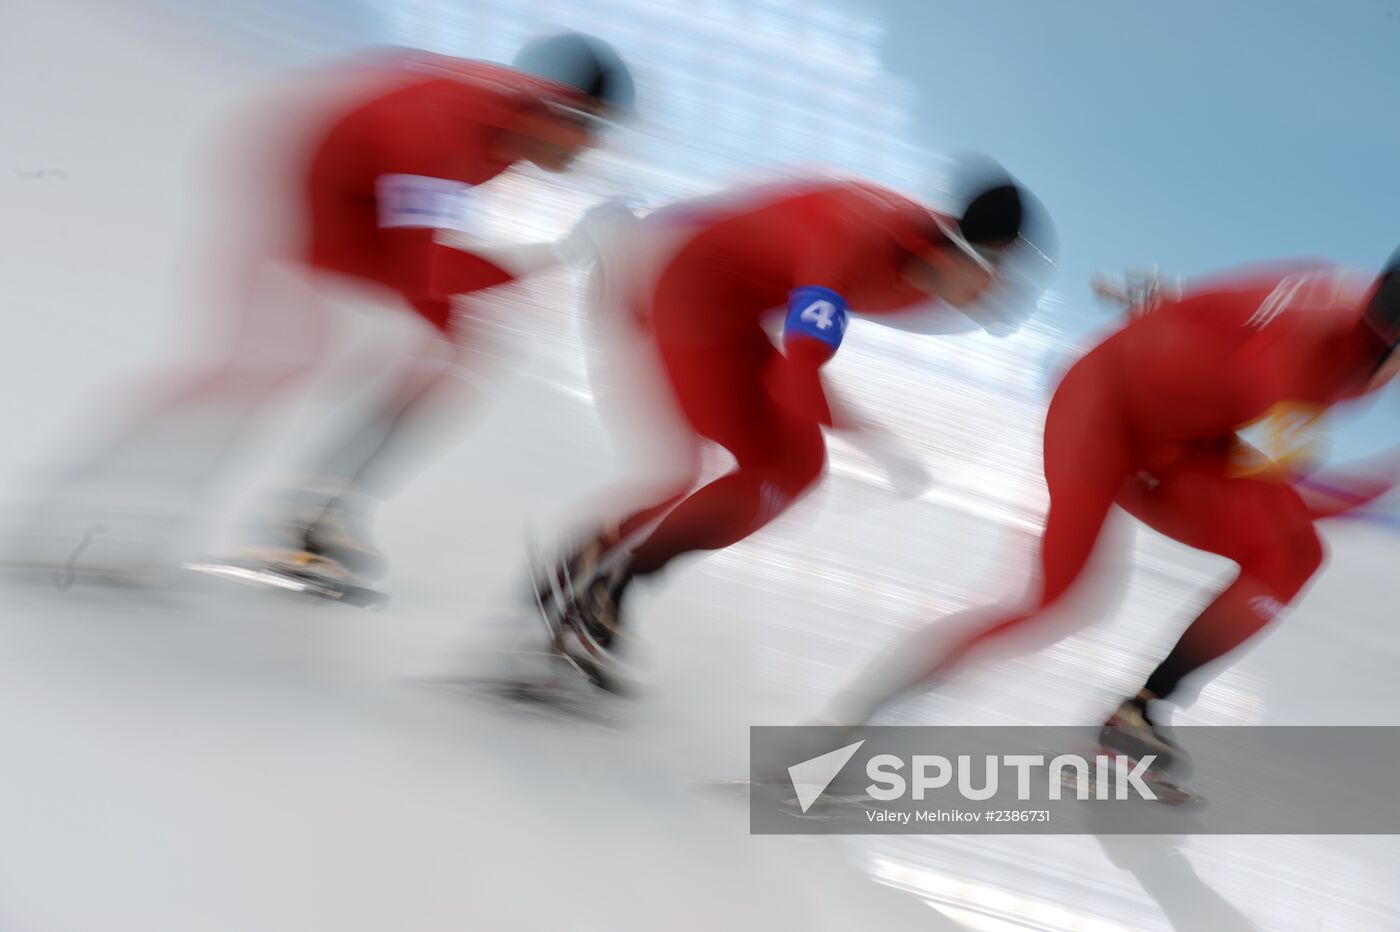 2014 Winter Olympics. Men's speed skating. Team pursuit. Preliminary rounds.